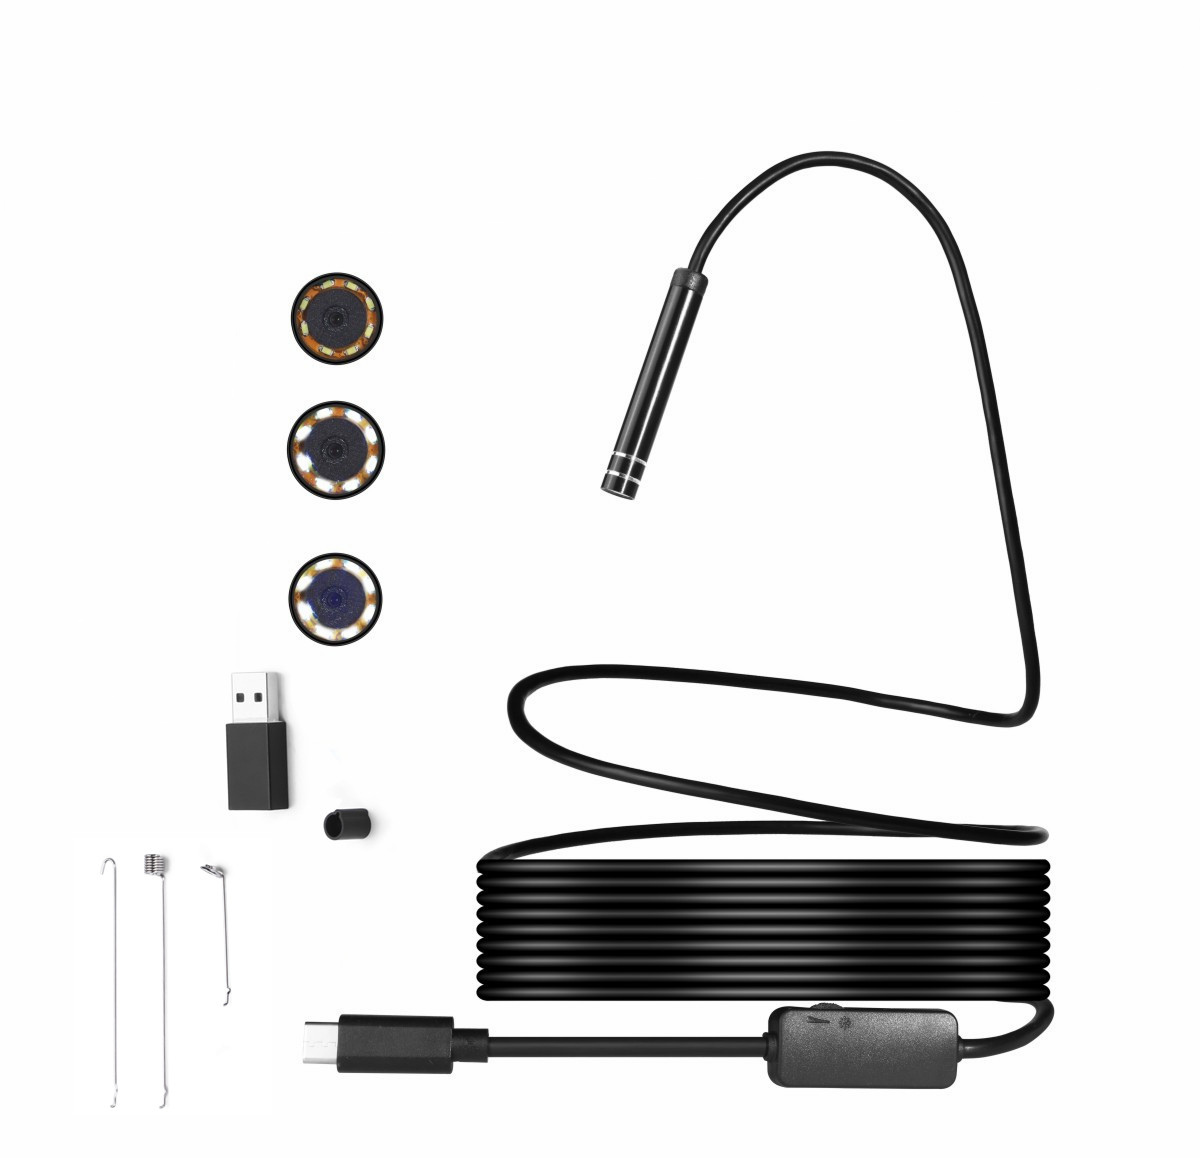 

7mm 6LED Waterproof Rigid Free Bending Type C Endoscope Borescopes Inspection Camera for Xiaomi Samsung PC